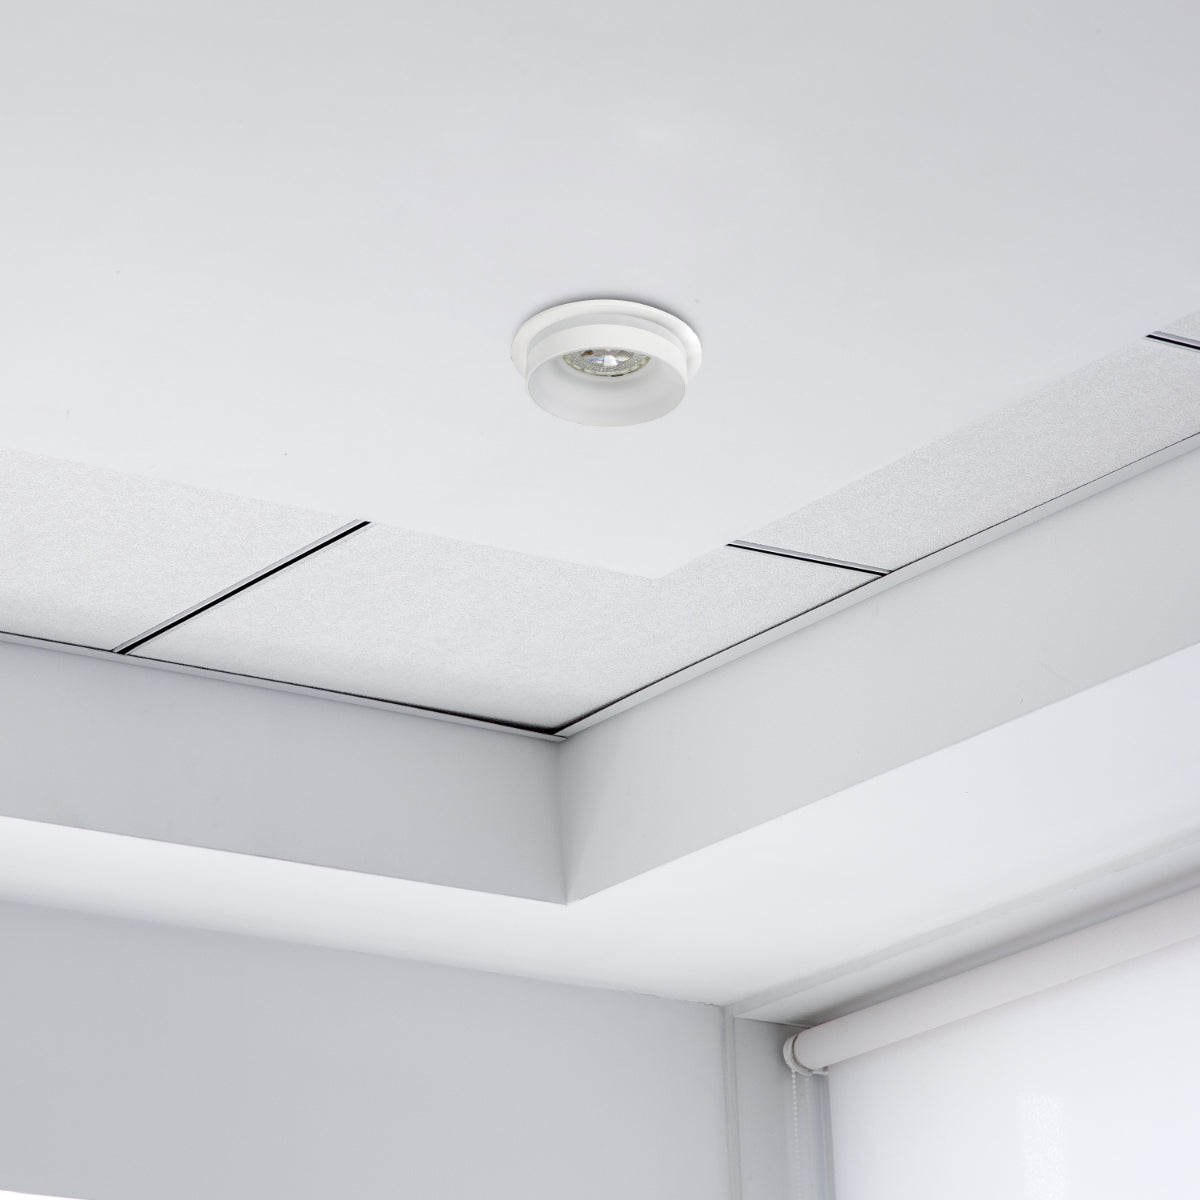 Usage of GU10 Recessed Aluminium Downlight - Dual-Tone Acrylic with Color Matched Trim 143-04043